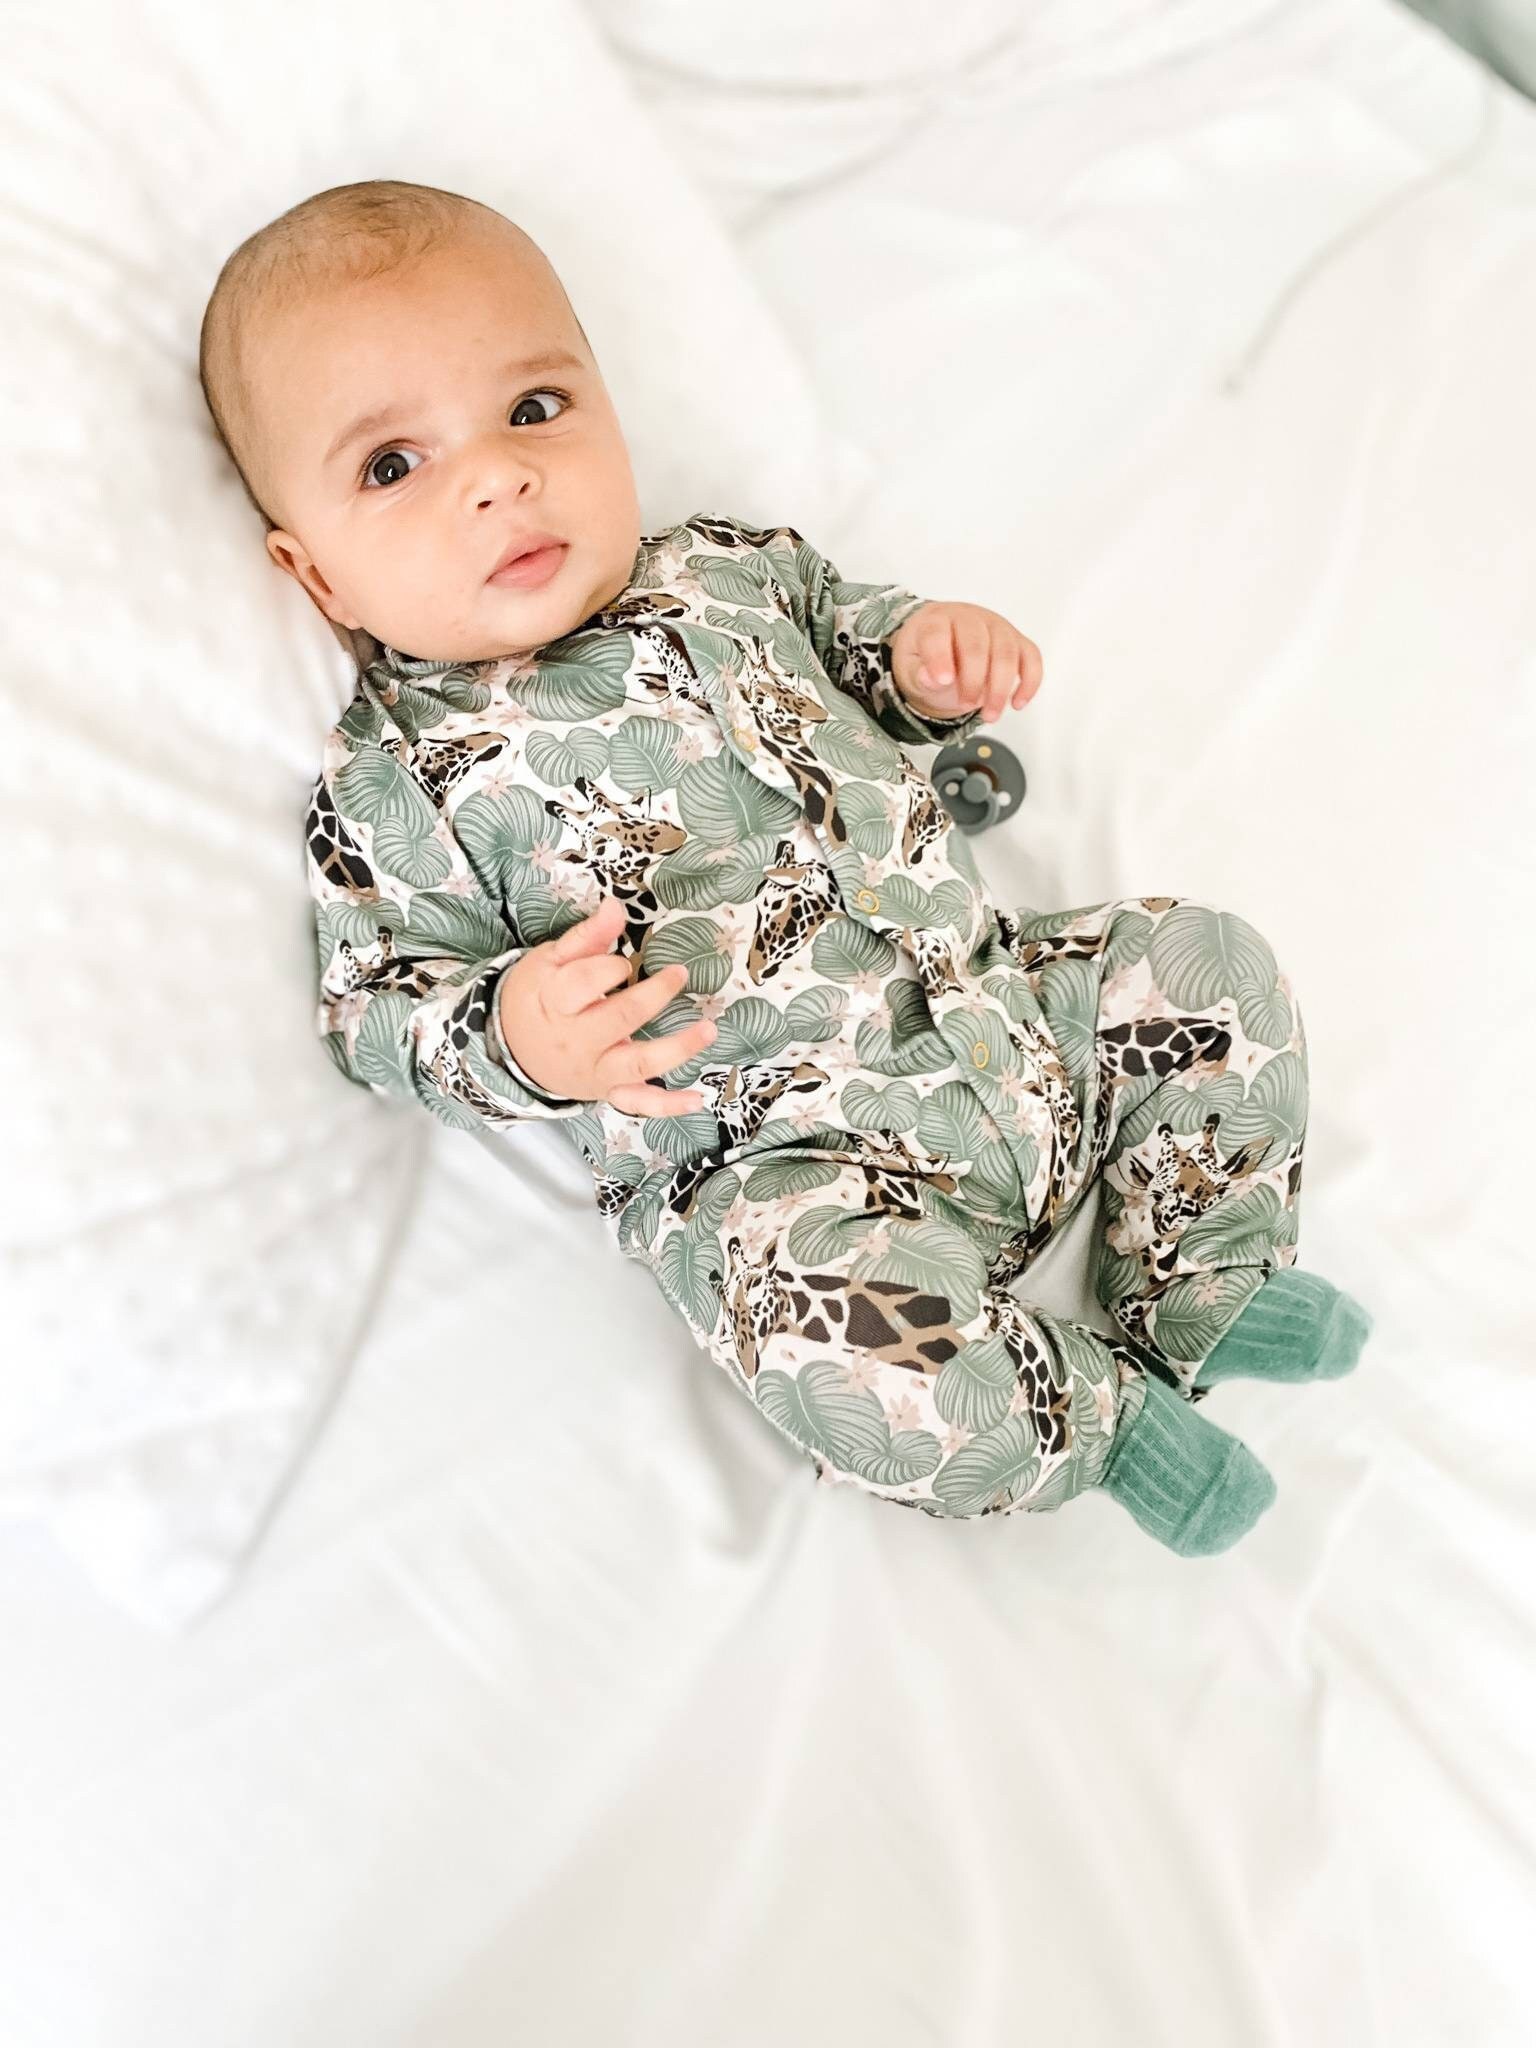 Get Wivvit Baby Boys Pack of 3 Elephant Giraffe Sleepsuit Rompers Sizes from Newborn to 24 Months 